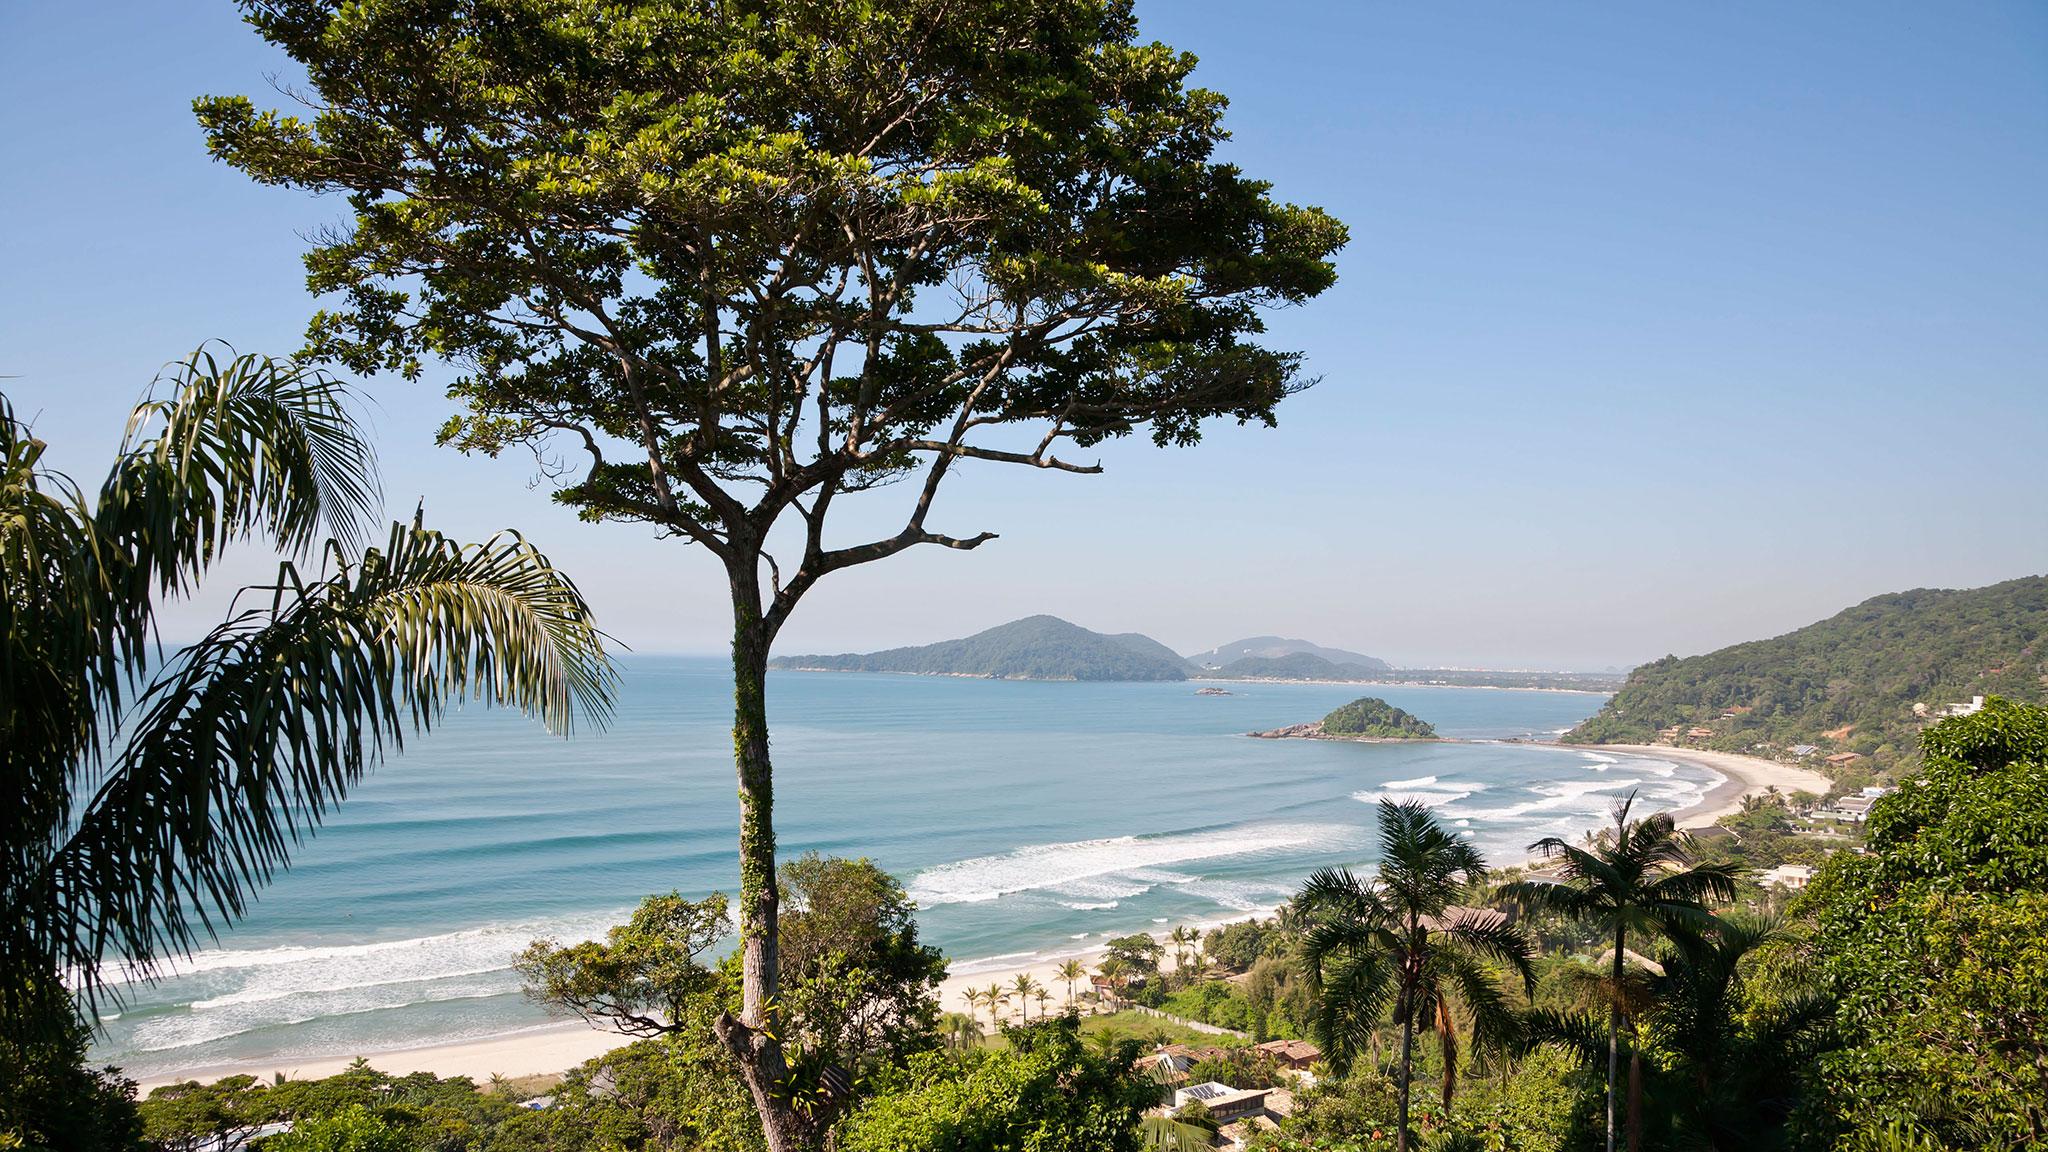 The other side of São Paulo: beach havens for the super